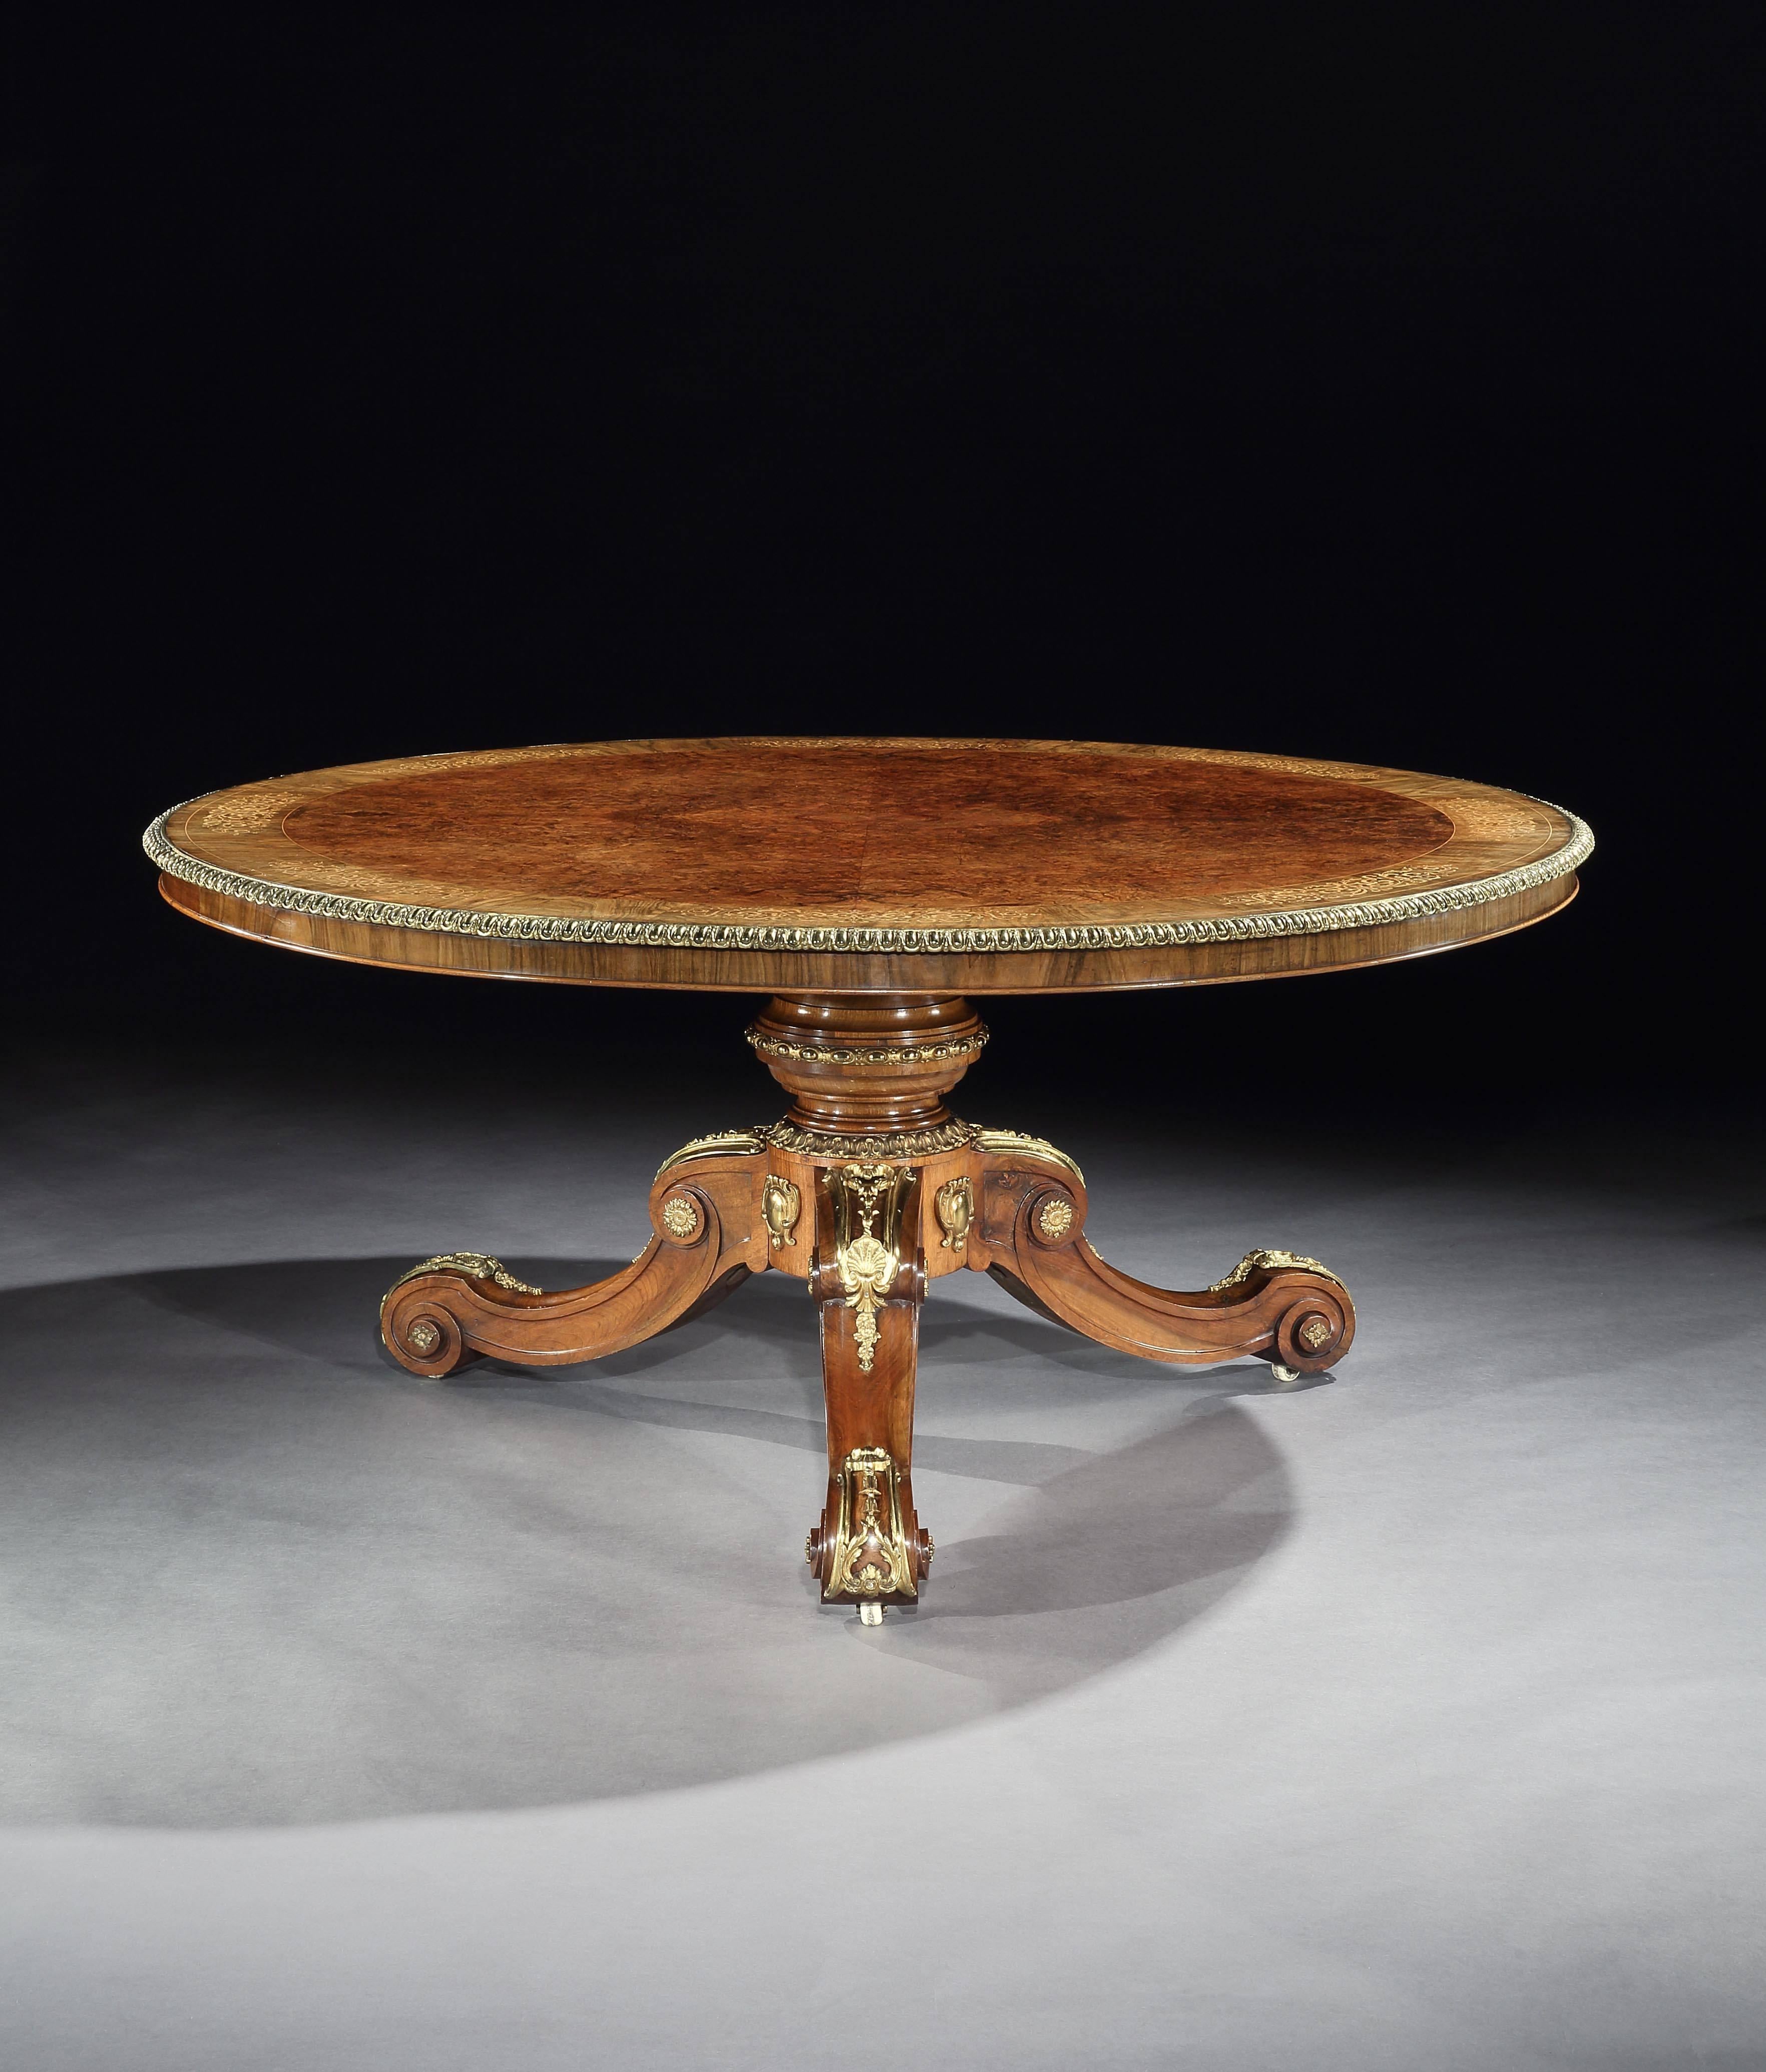 A large marquetry centre table in the manner of Holland and Sons

Constructed in finely marked European & Circassian walnut, with extensive ormolu enhancements and foliate inlays in boxwood; rising from a tripartite swept leg base, the scrolled